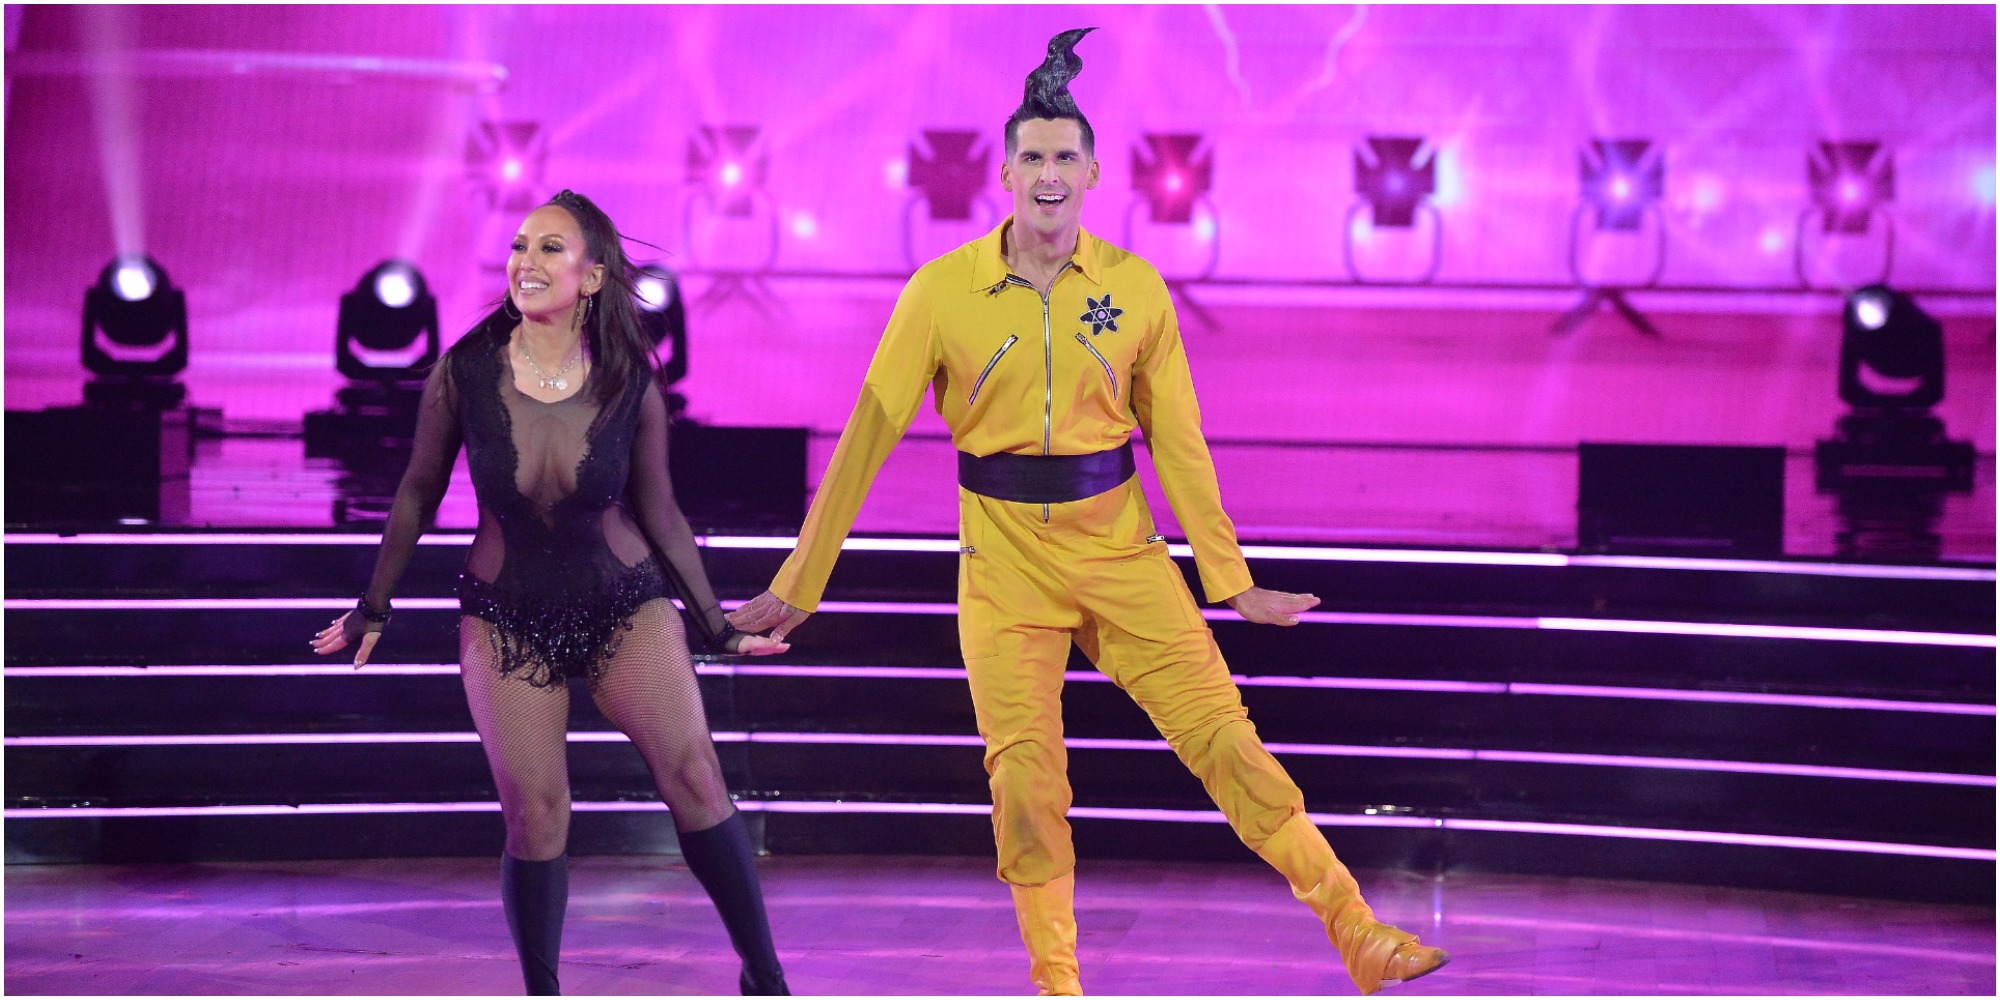 Cheryl Burke and Cody Rigsby perform a Dancing with the Stars routine.